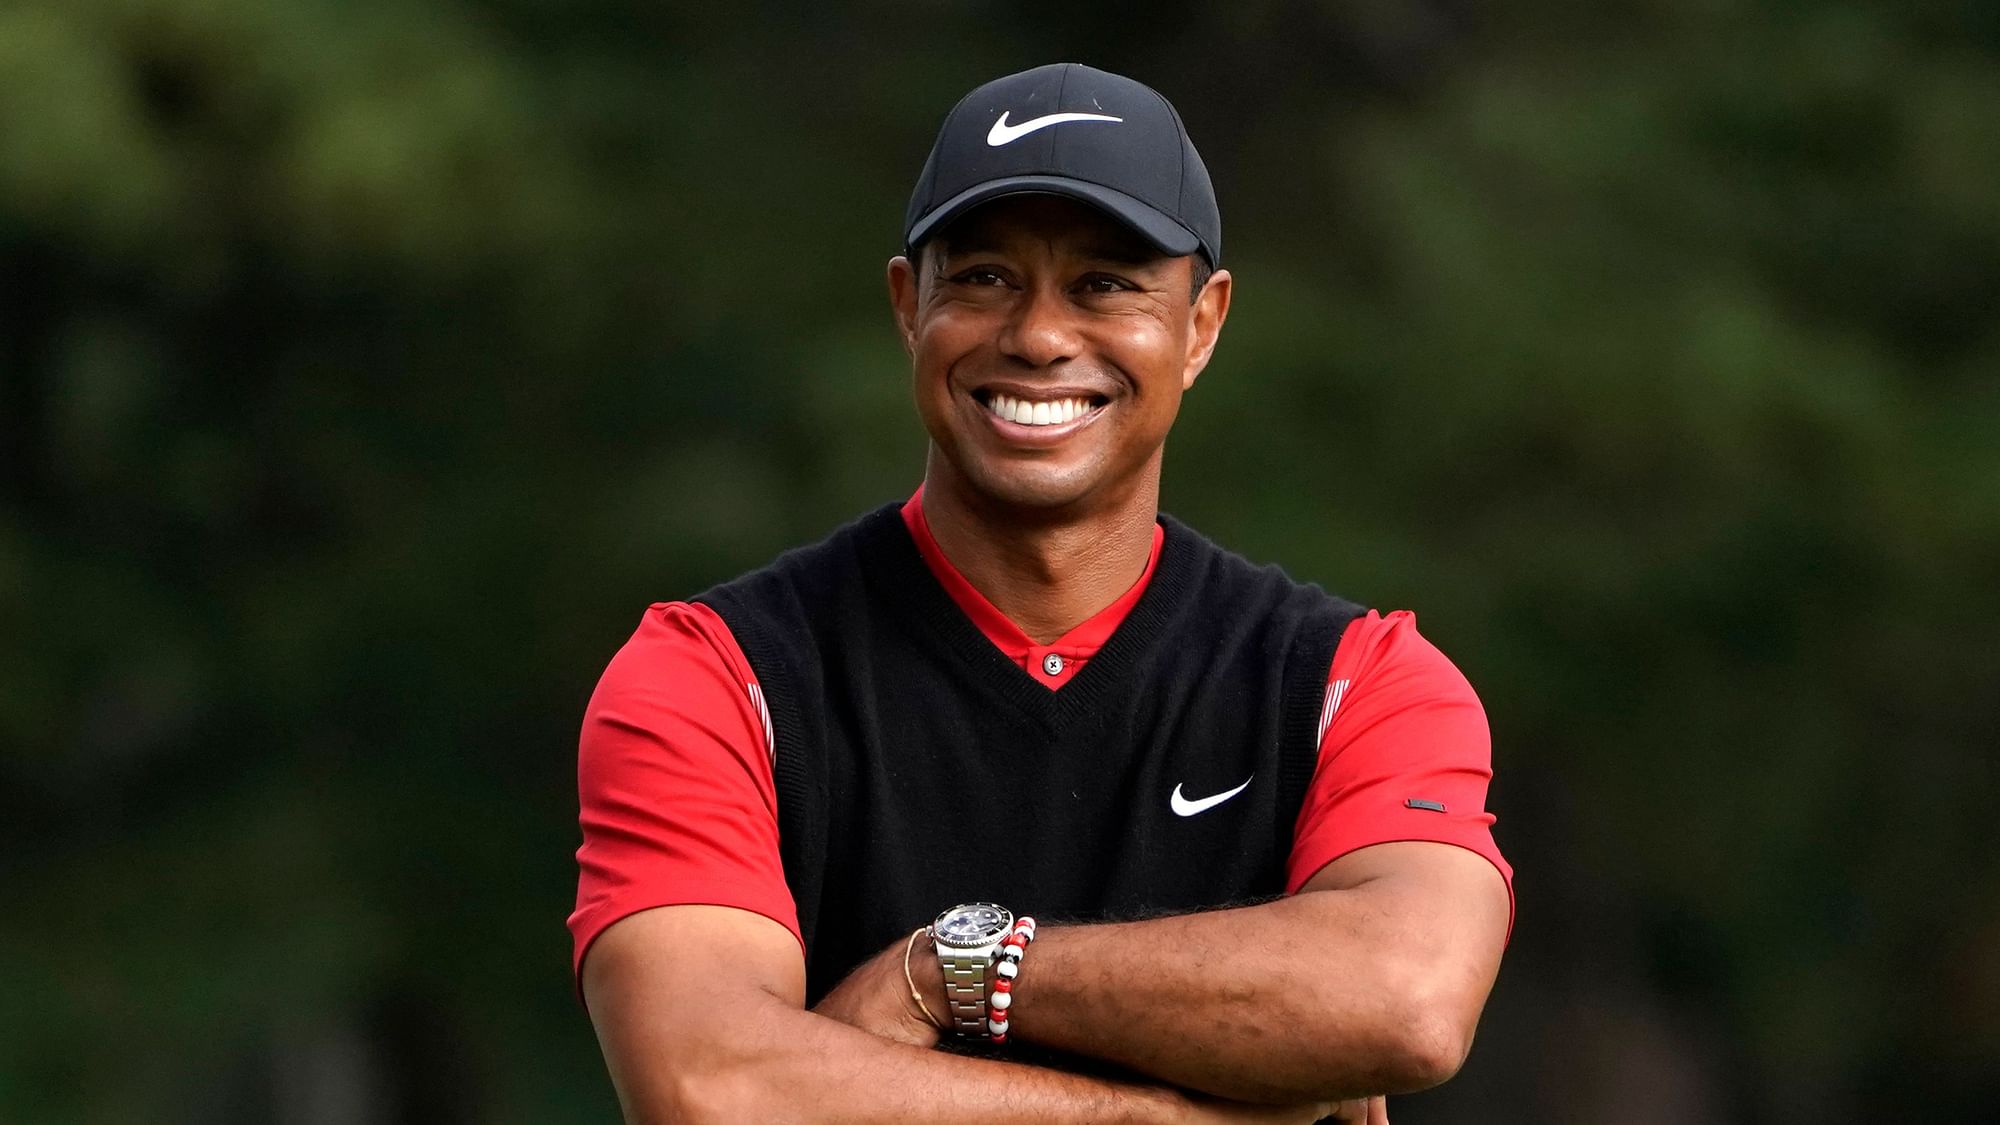 Tiger Woods of the United States smiles during a winner’s ceremony after winning the Zozo Championship PGA Tour at the Accordia Golf Narashino country club in Inzai, east of Tokyo, Japan, Monday, Oct. 28, 2019.